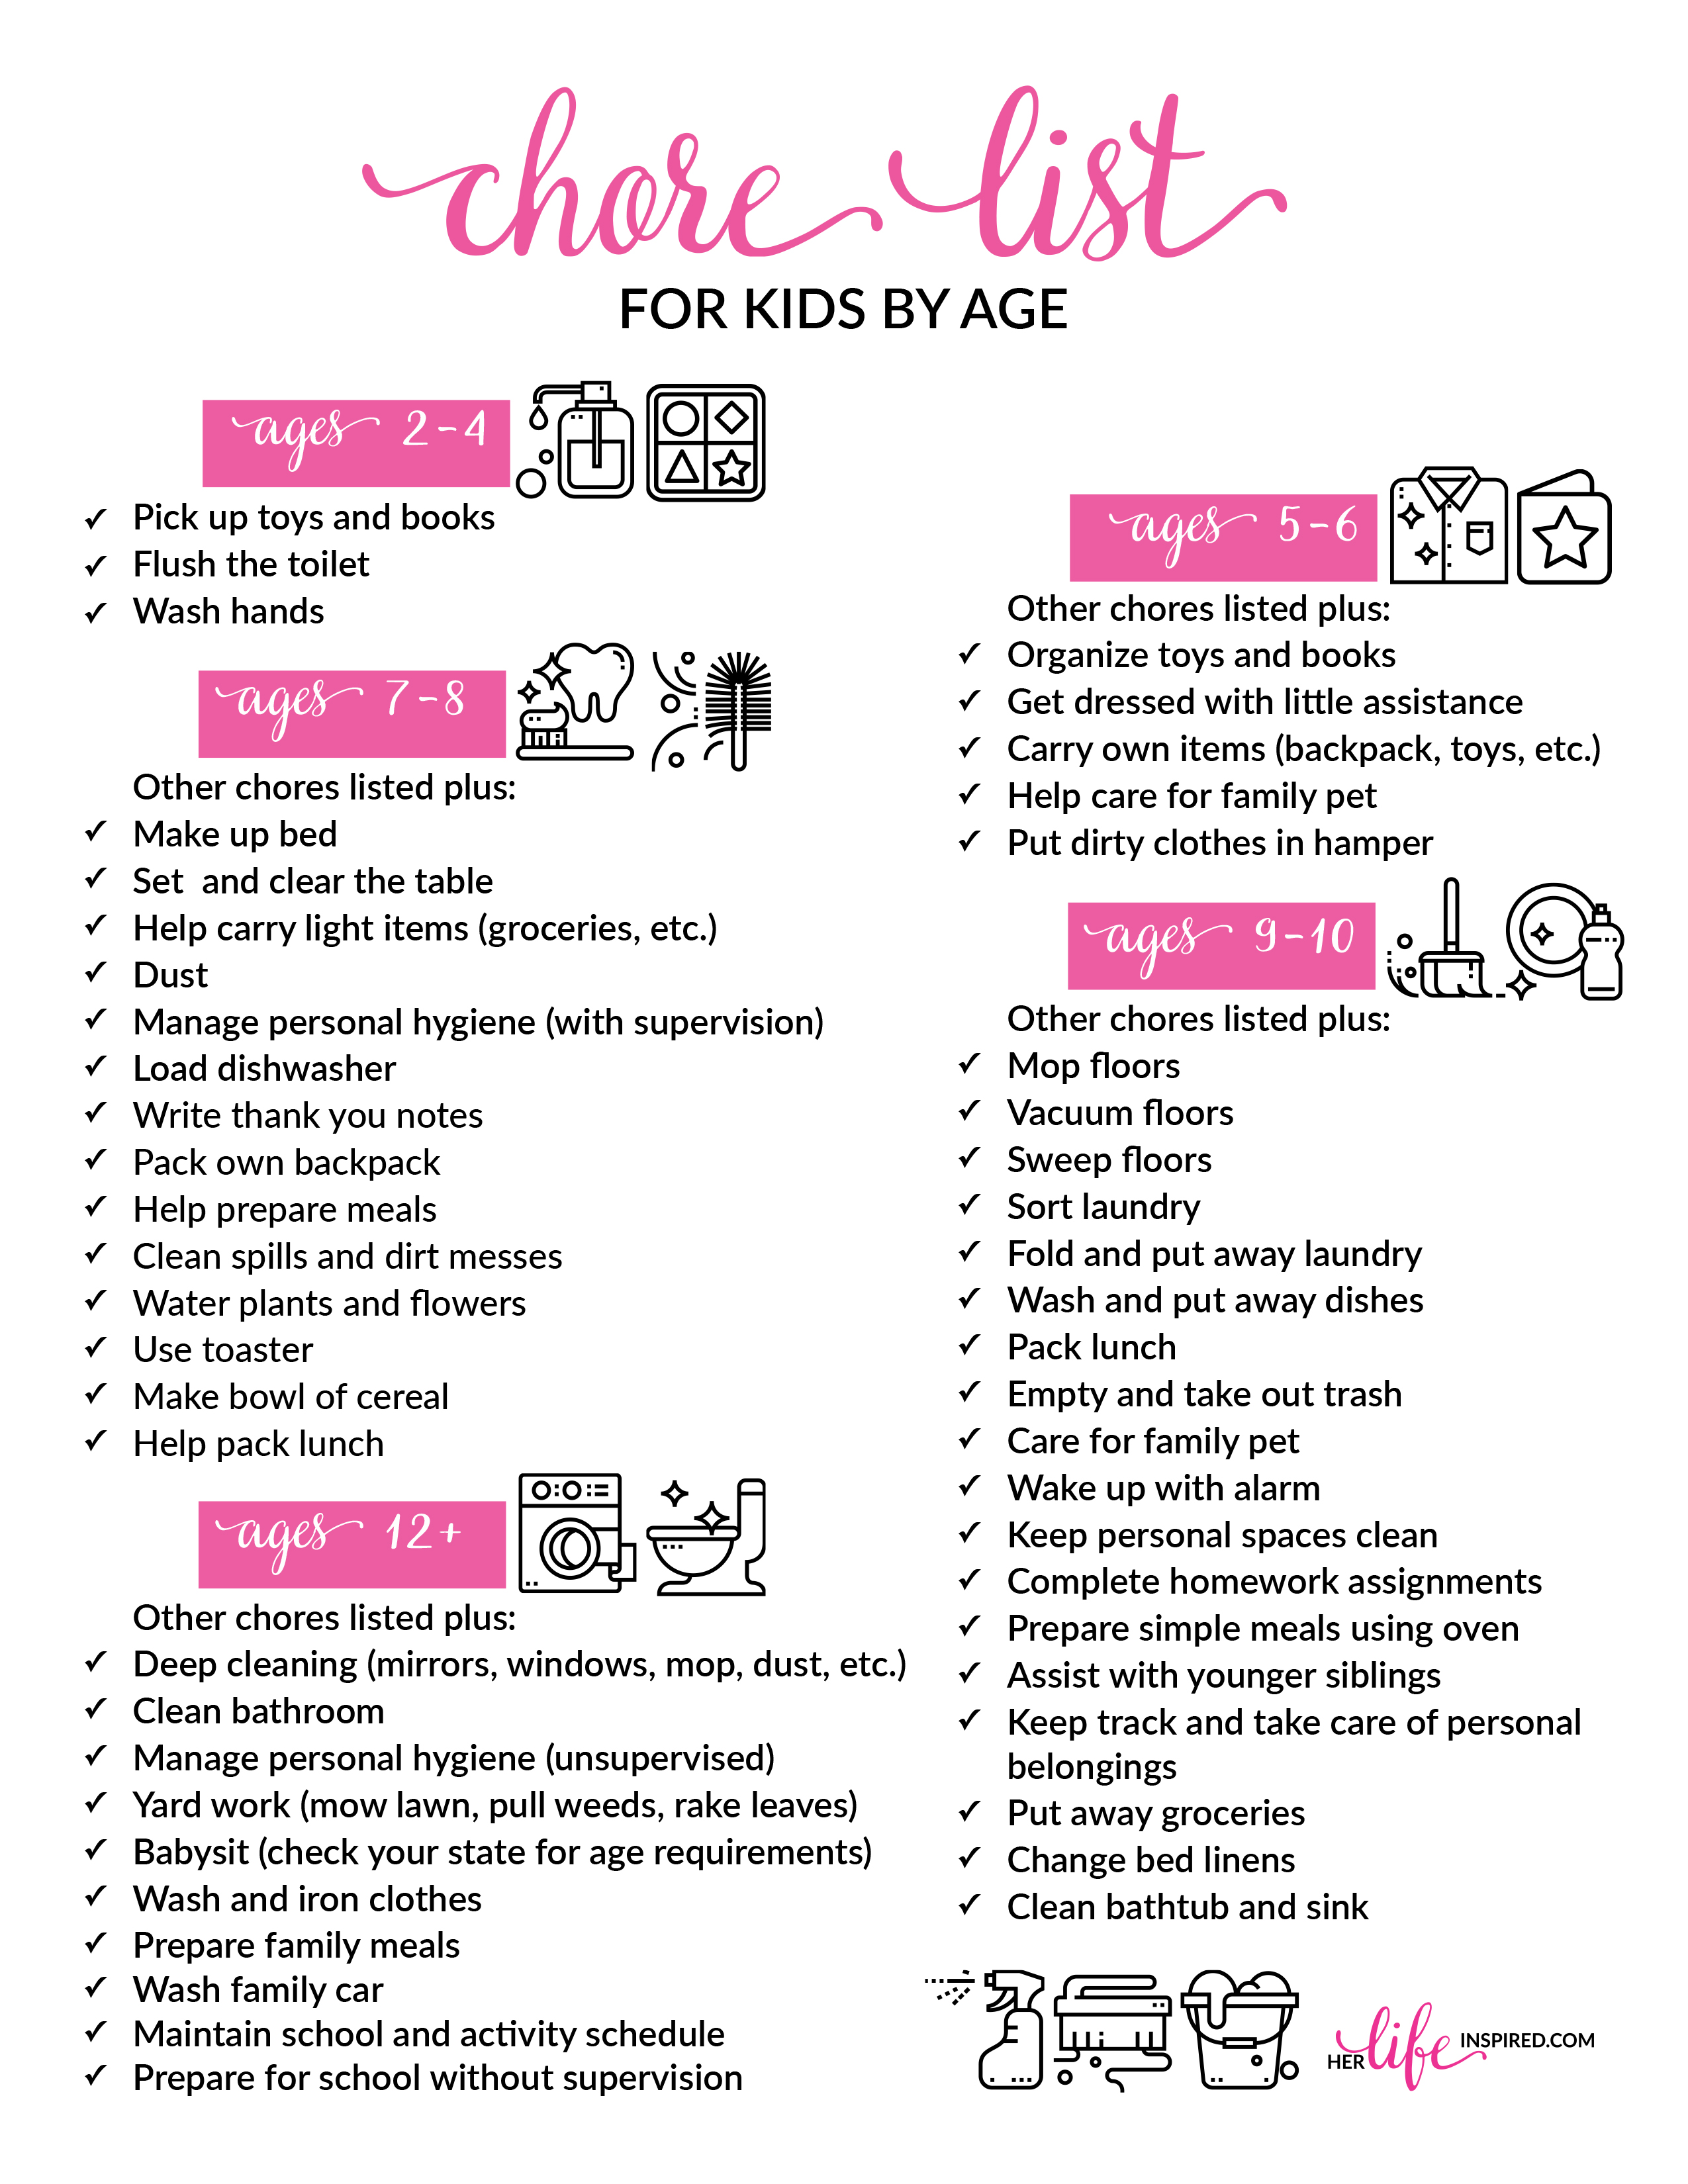 chore-list-for-kids-by-age-her-life-inspired